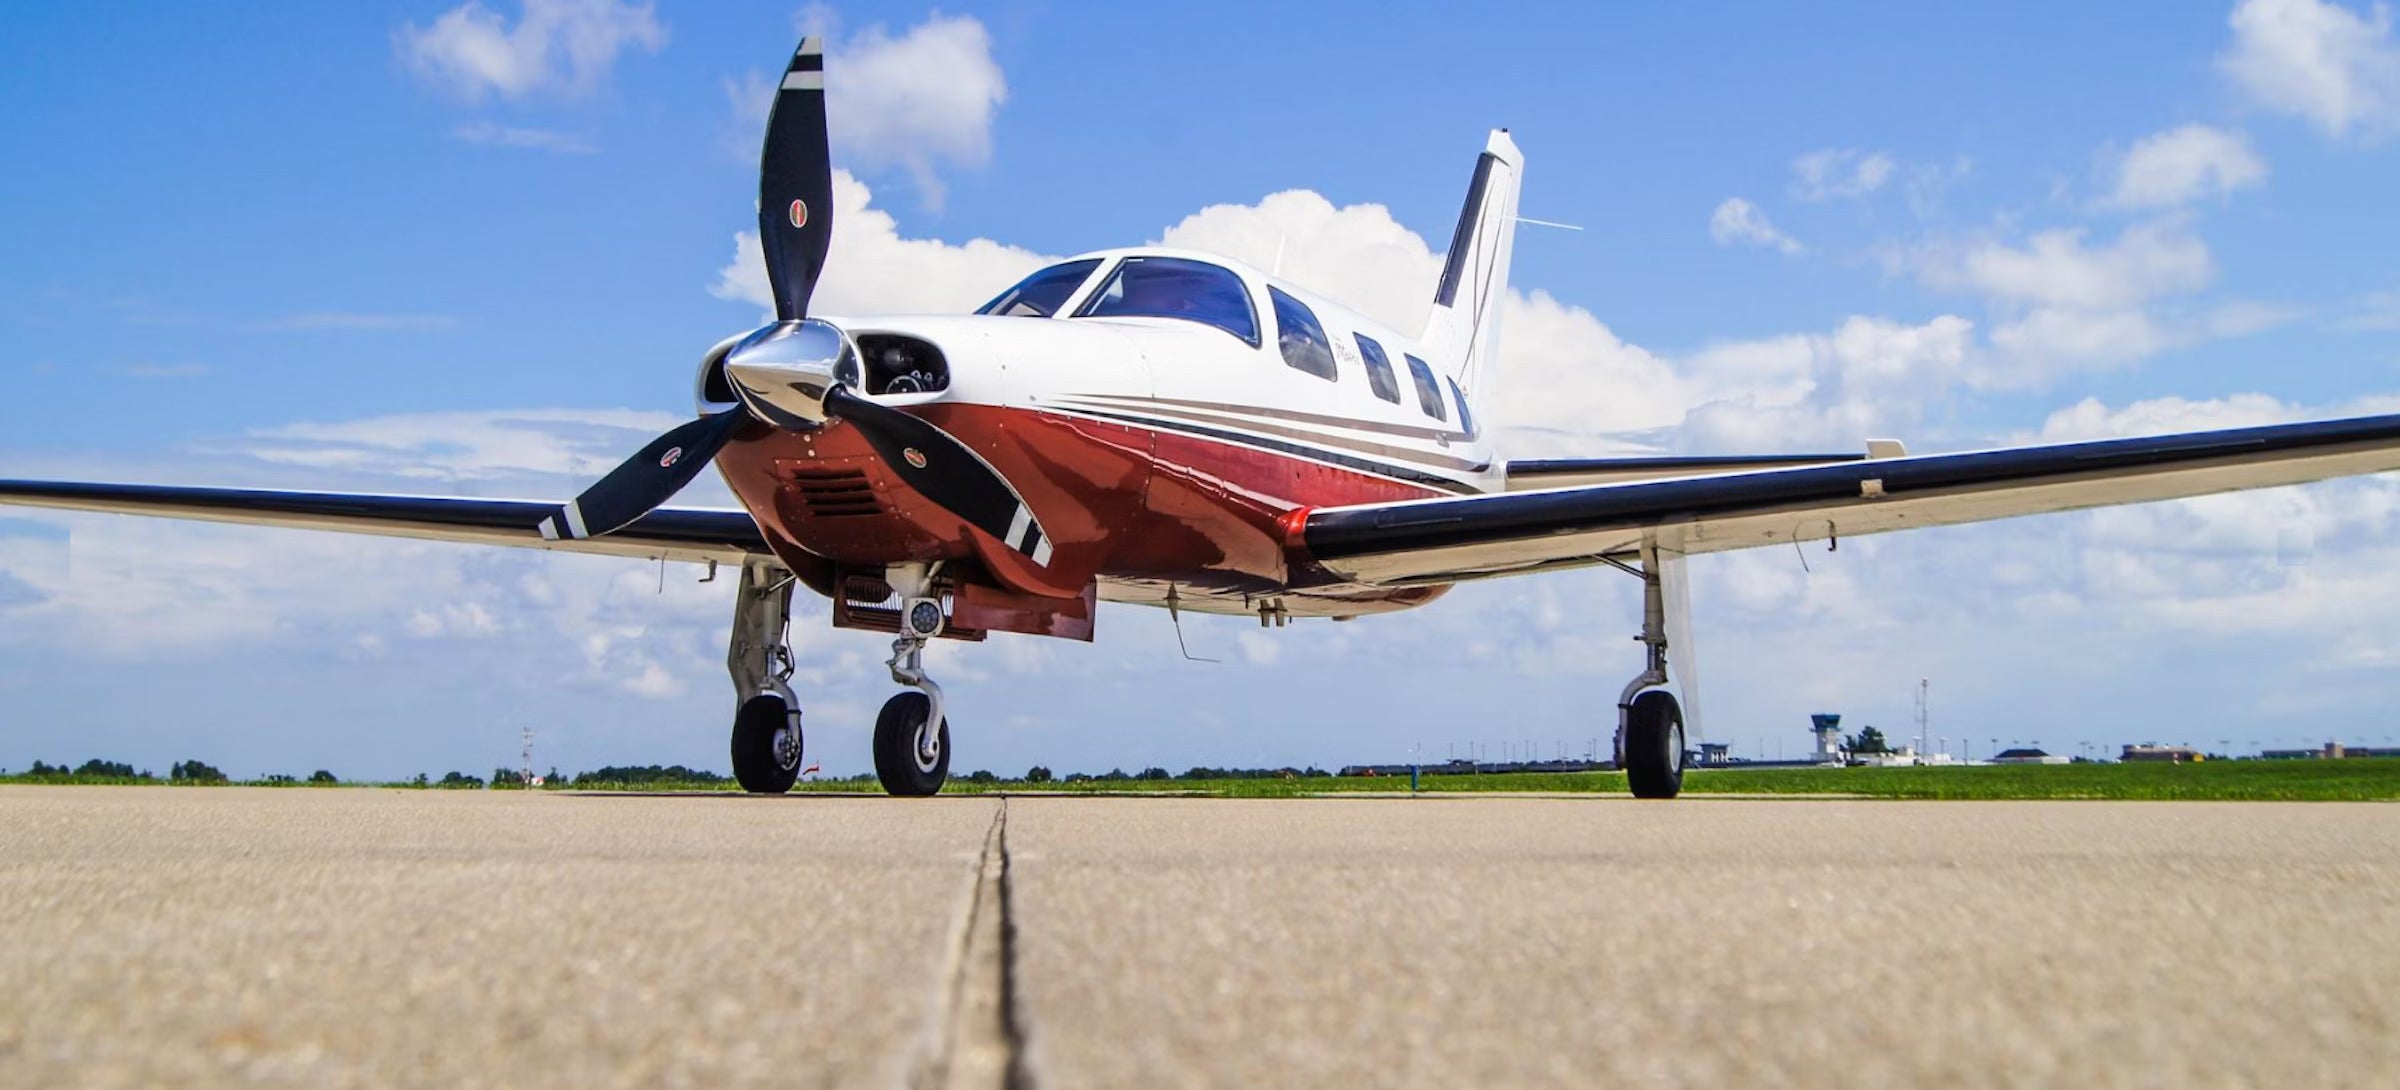 This 2010 Piper PA-46-350T Matrix Is an ‘AircraftForSale’ Top Pick Tailor-Made for Pilots Who Ar